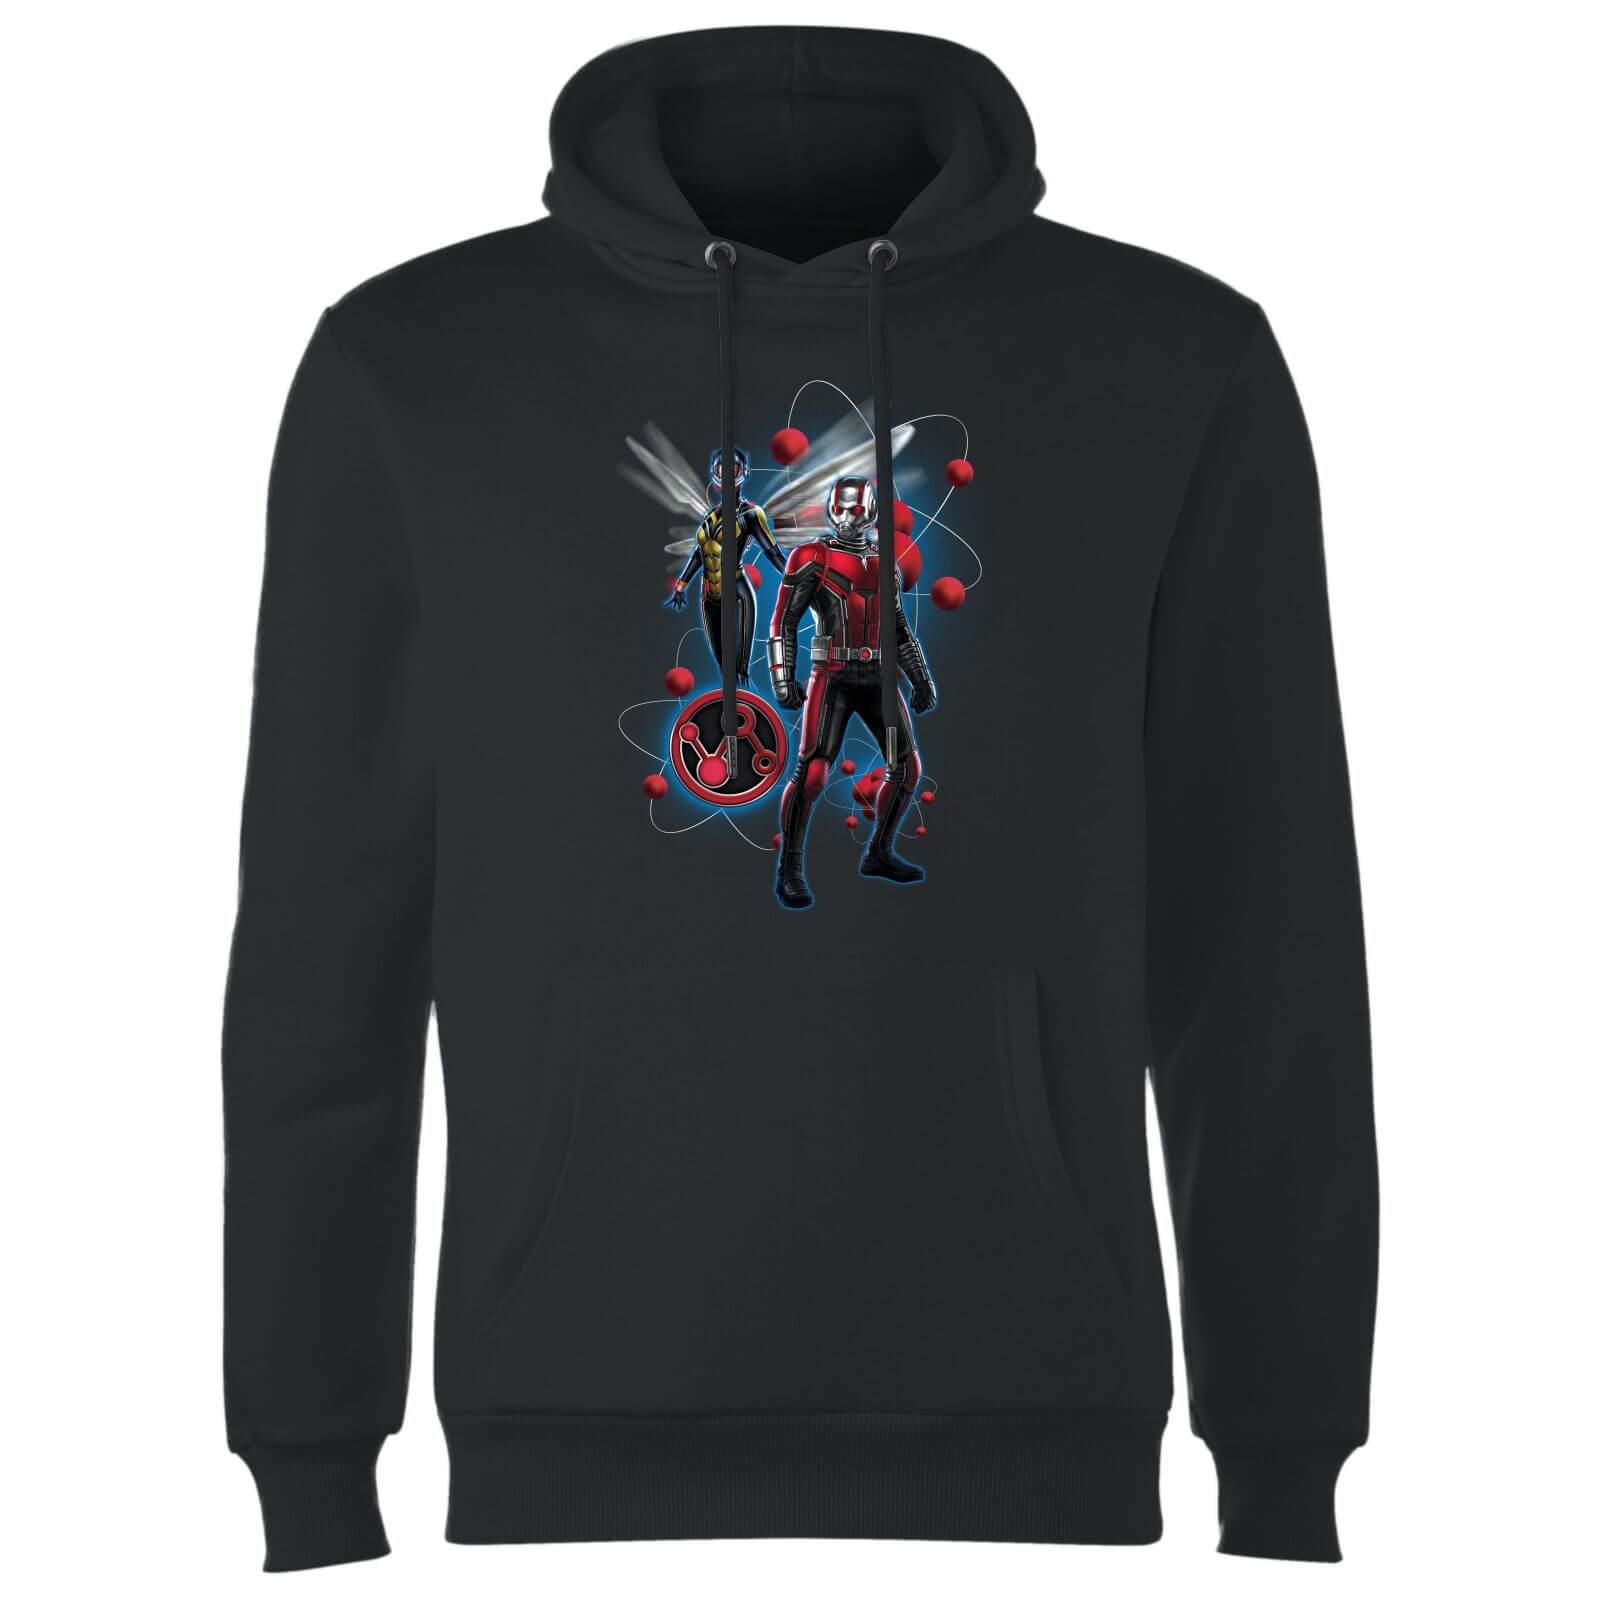 Ant-Man And The Wasp Particle Pose Hoodie - Black - S